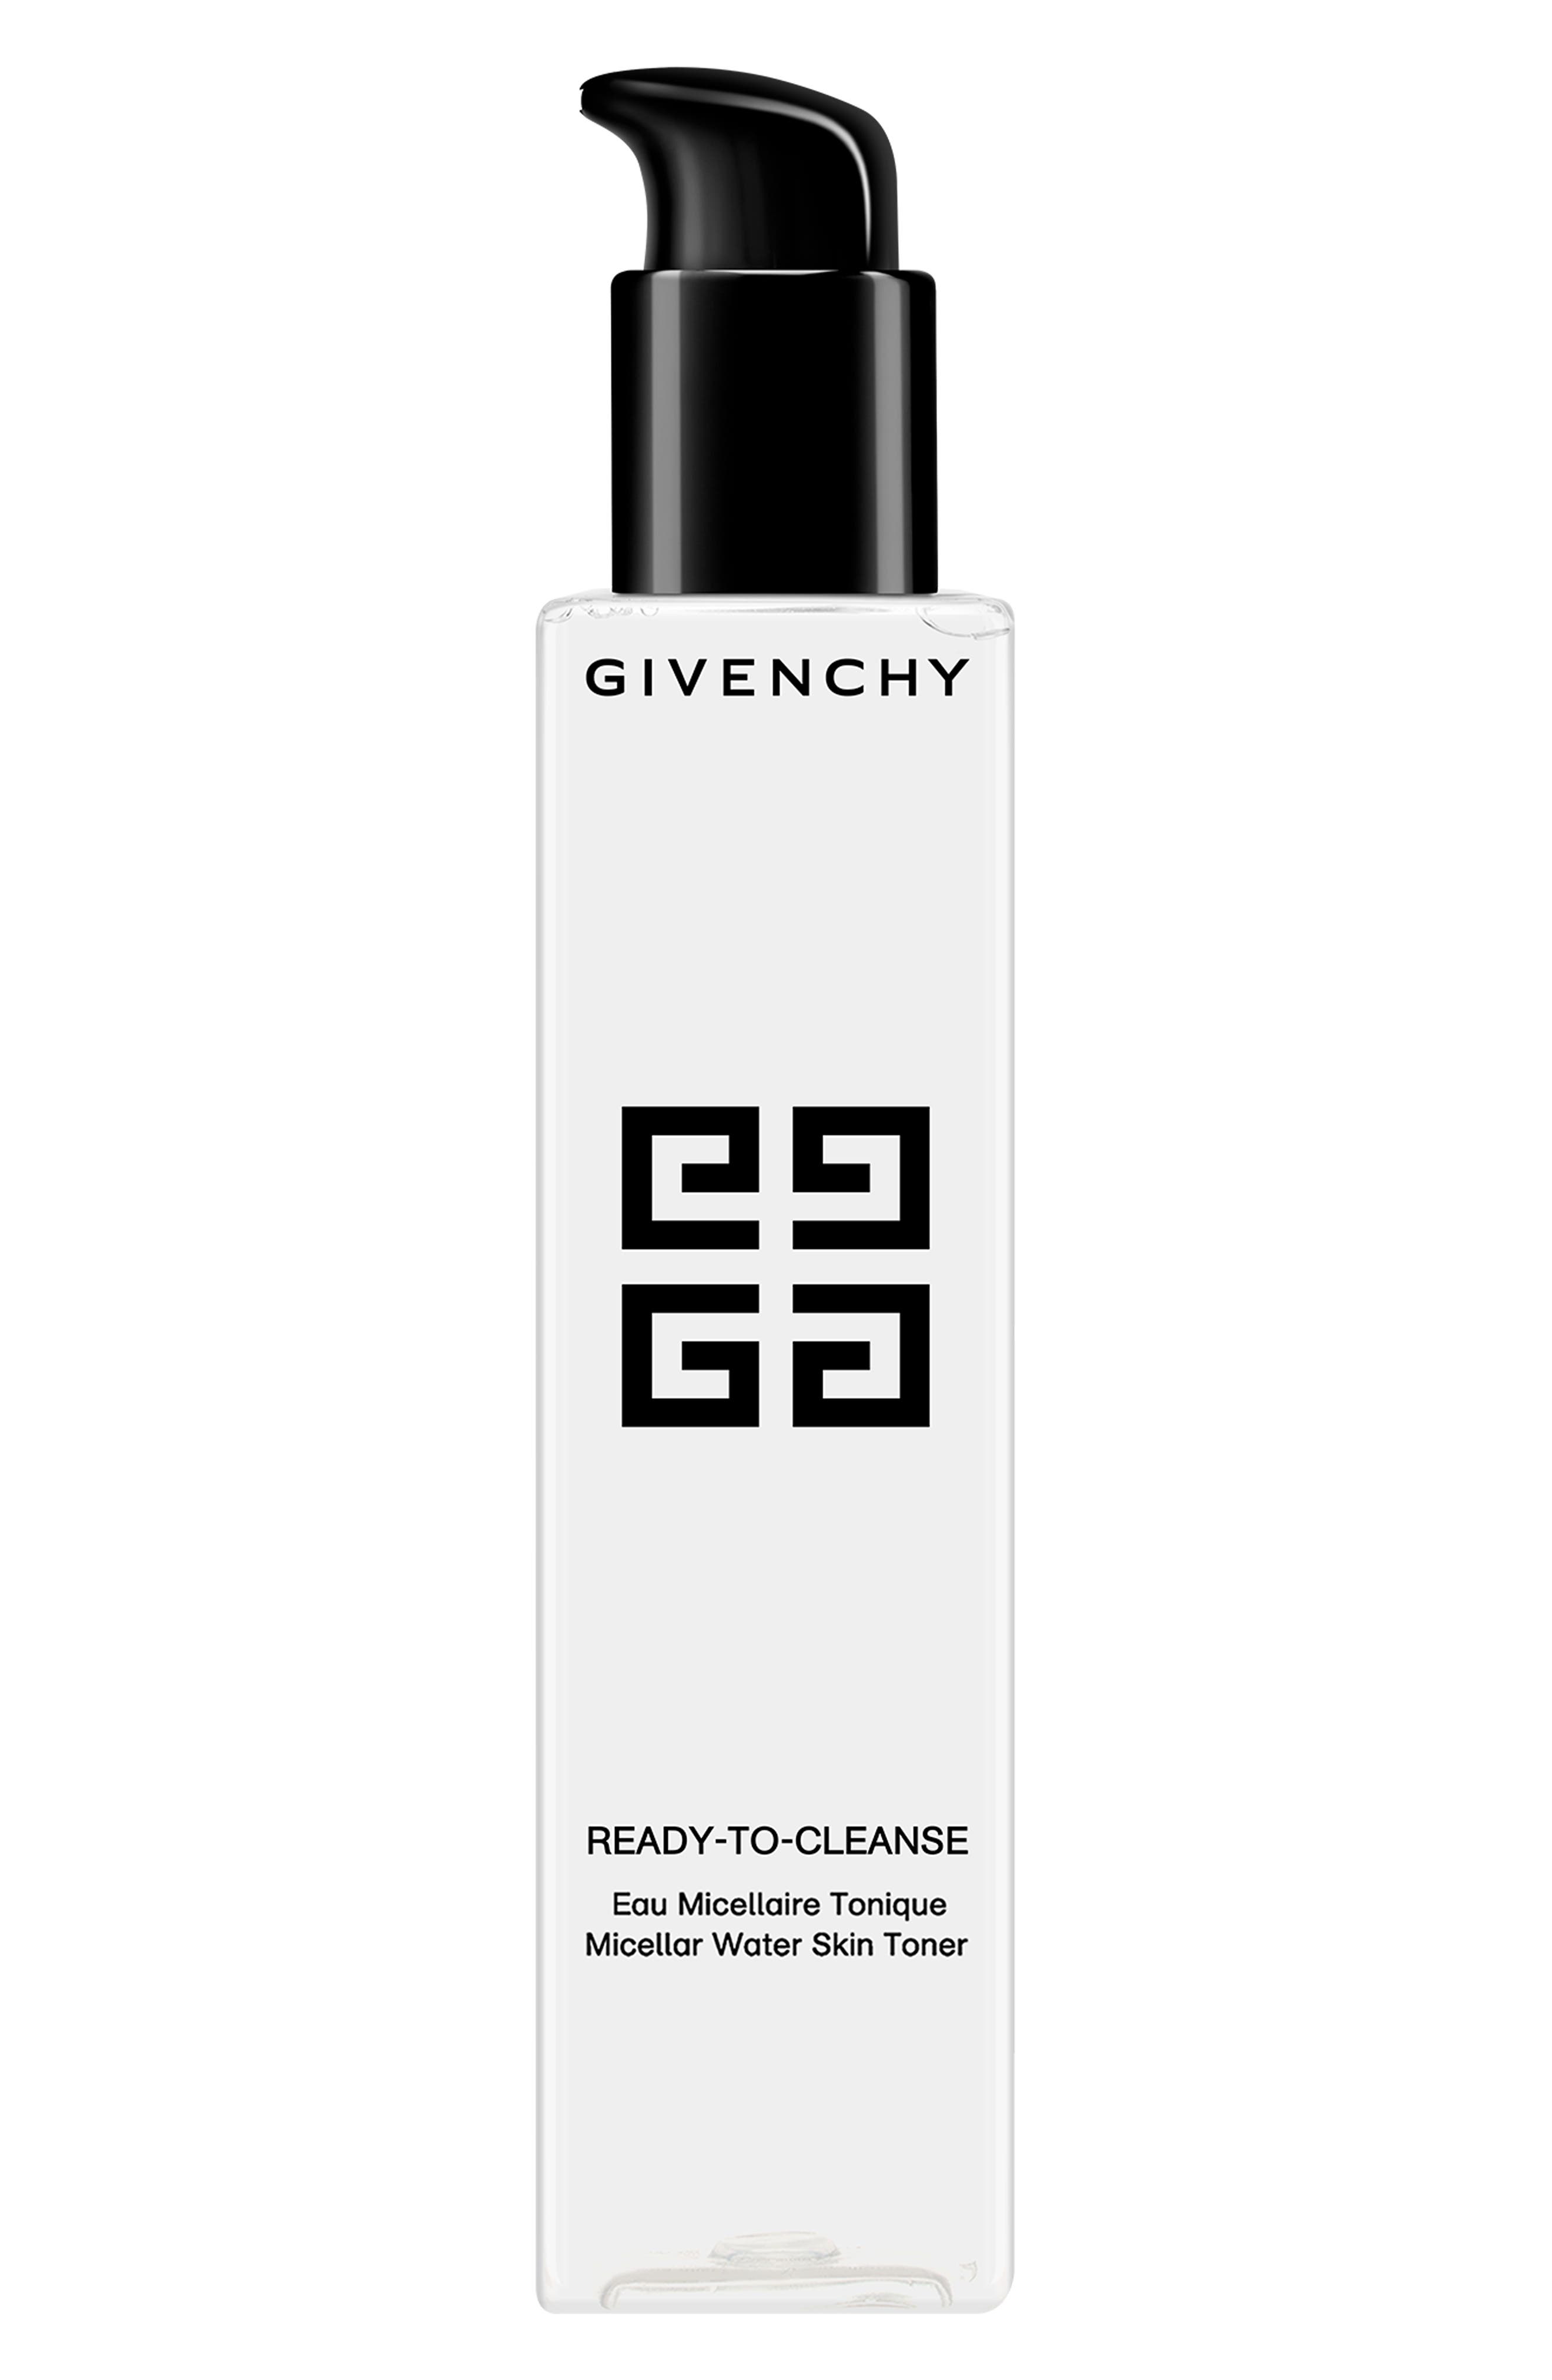 Givenchy Skin Care | Nordstrom